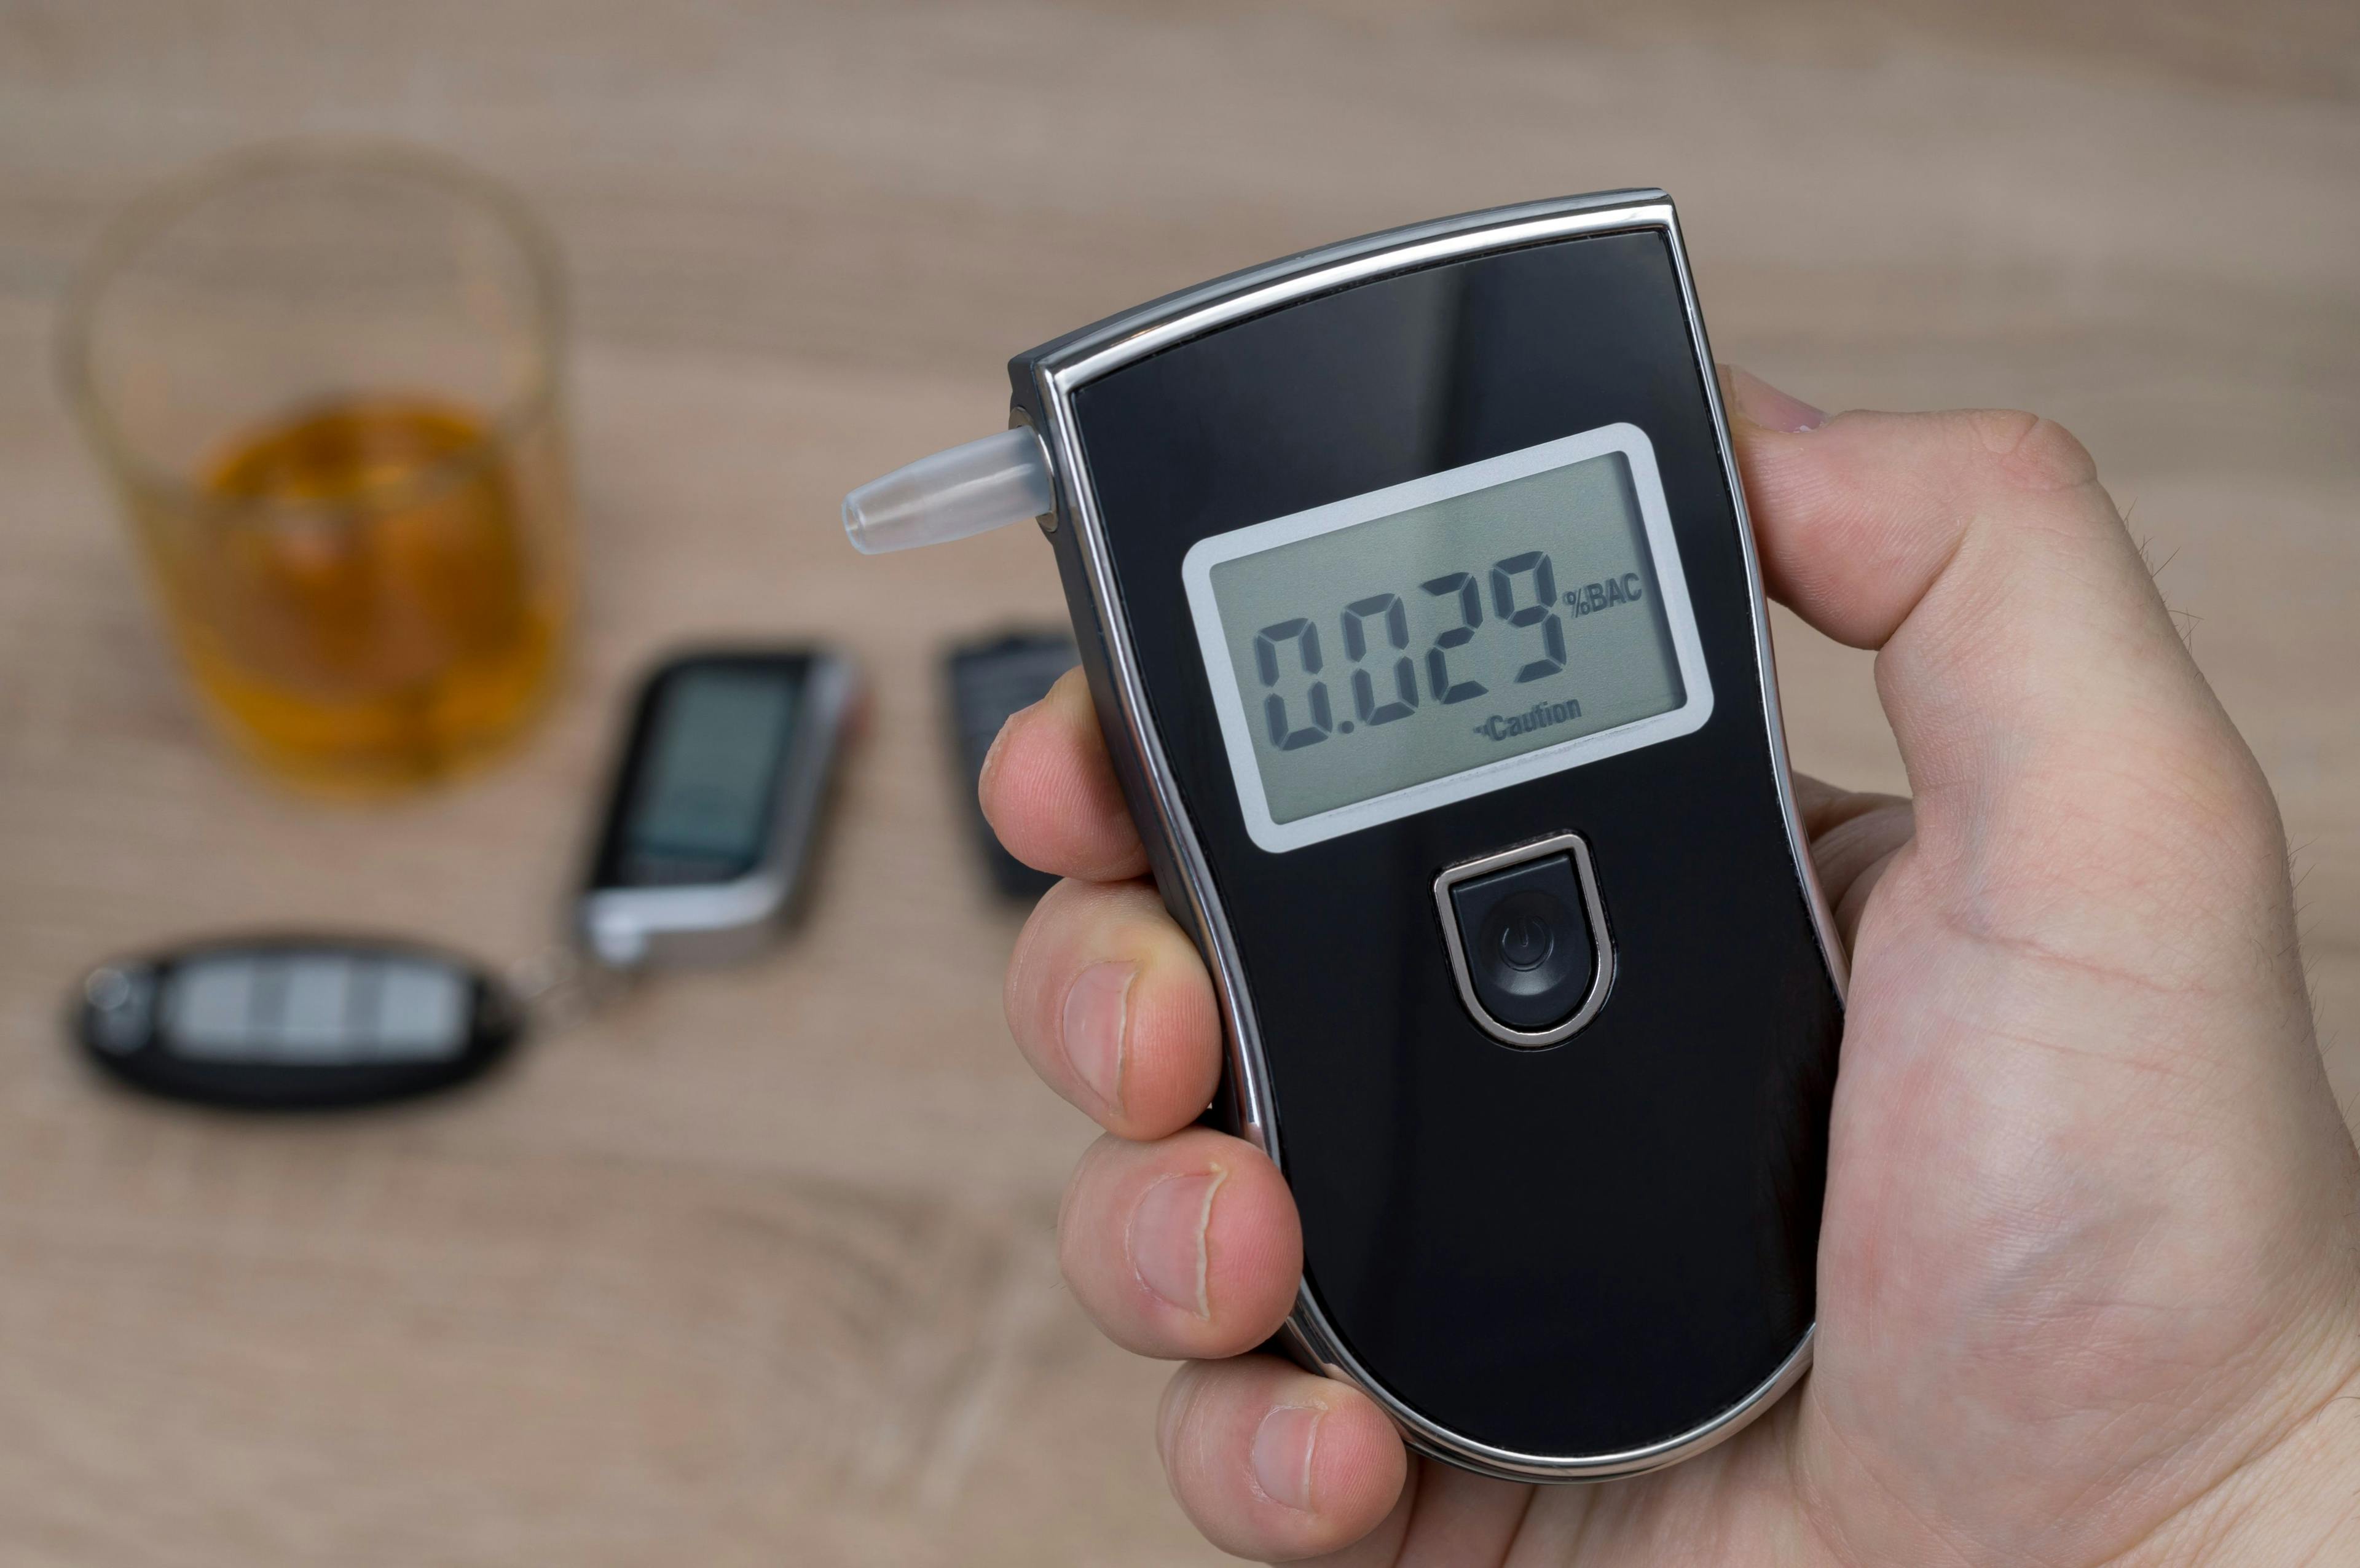 breathalyzer, alcohol and car keys, the concept of driving a car under the influence of alcohol | Image Credit: © Антон Скрипачев - stock.adobe.com